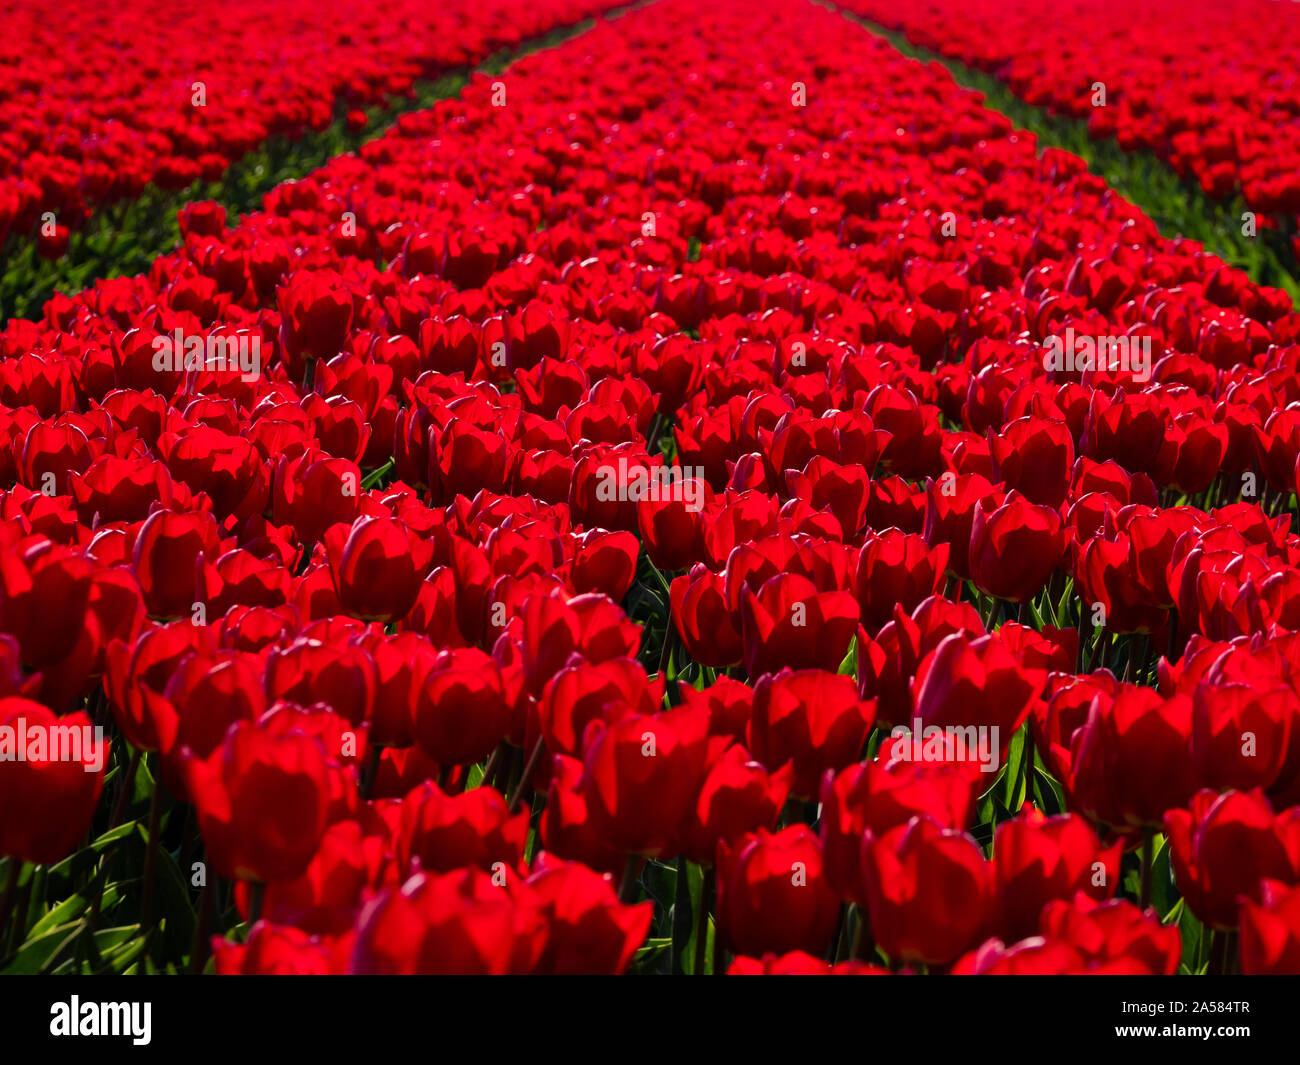 Landscape with field of red tulips, Schagerbrug, North Holland, Netherlands Stock Photo